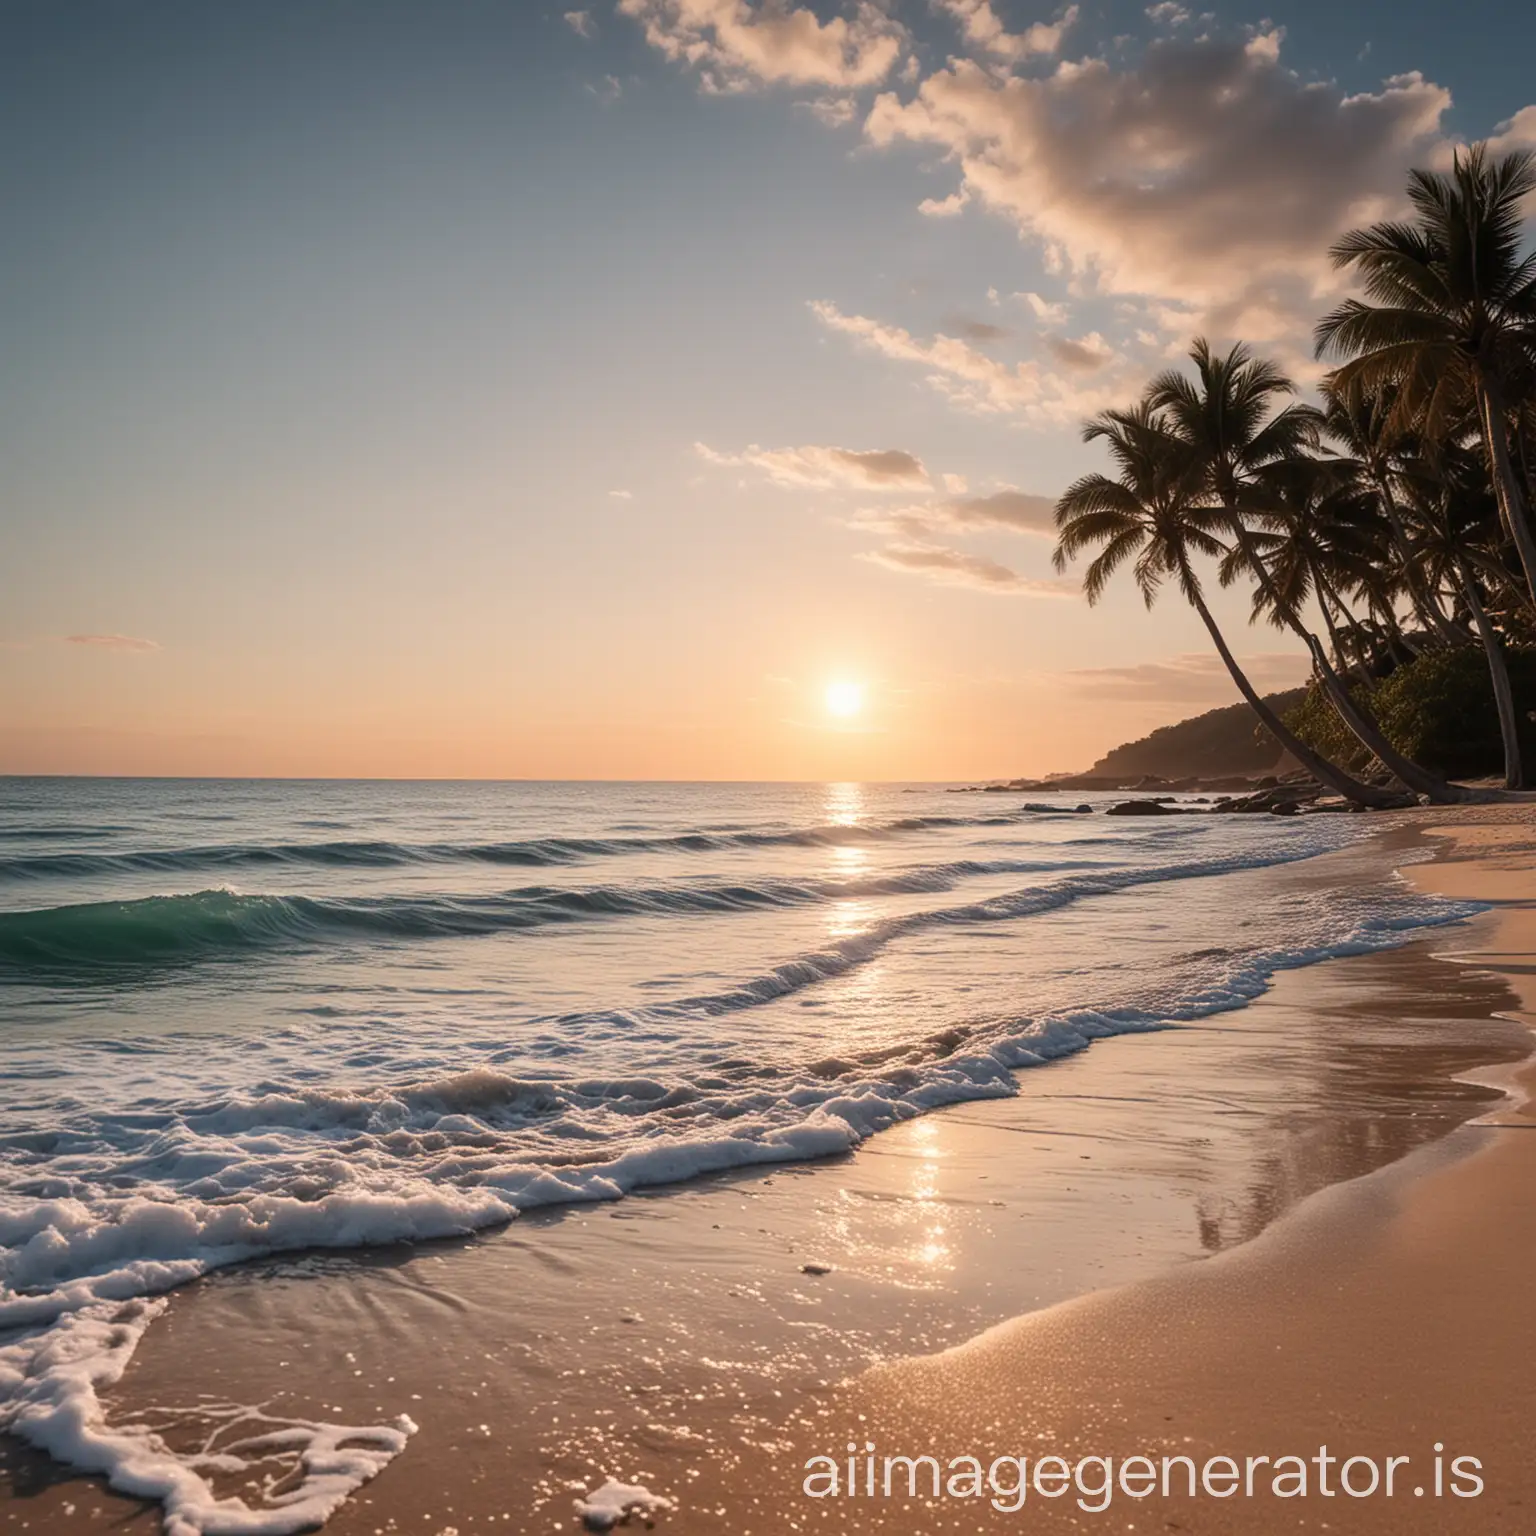 create a background image with calm beach